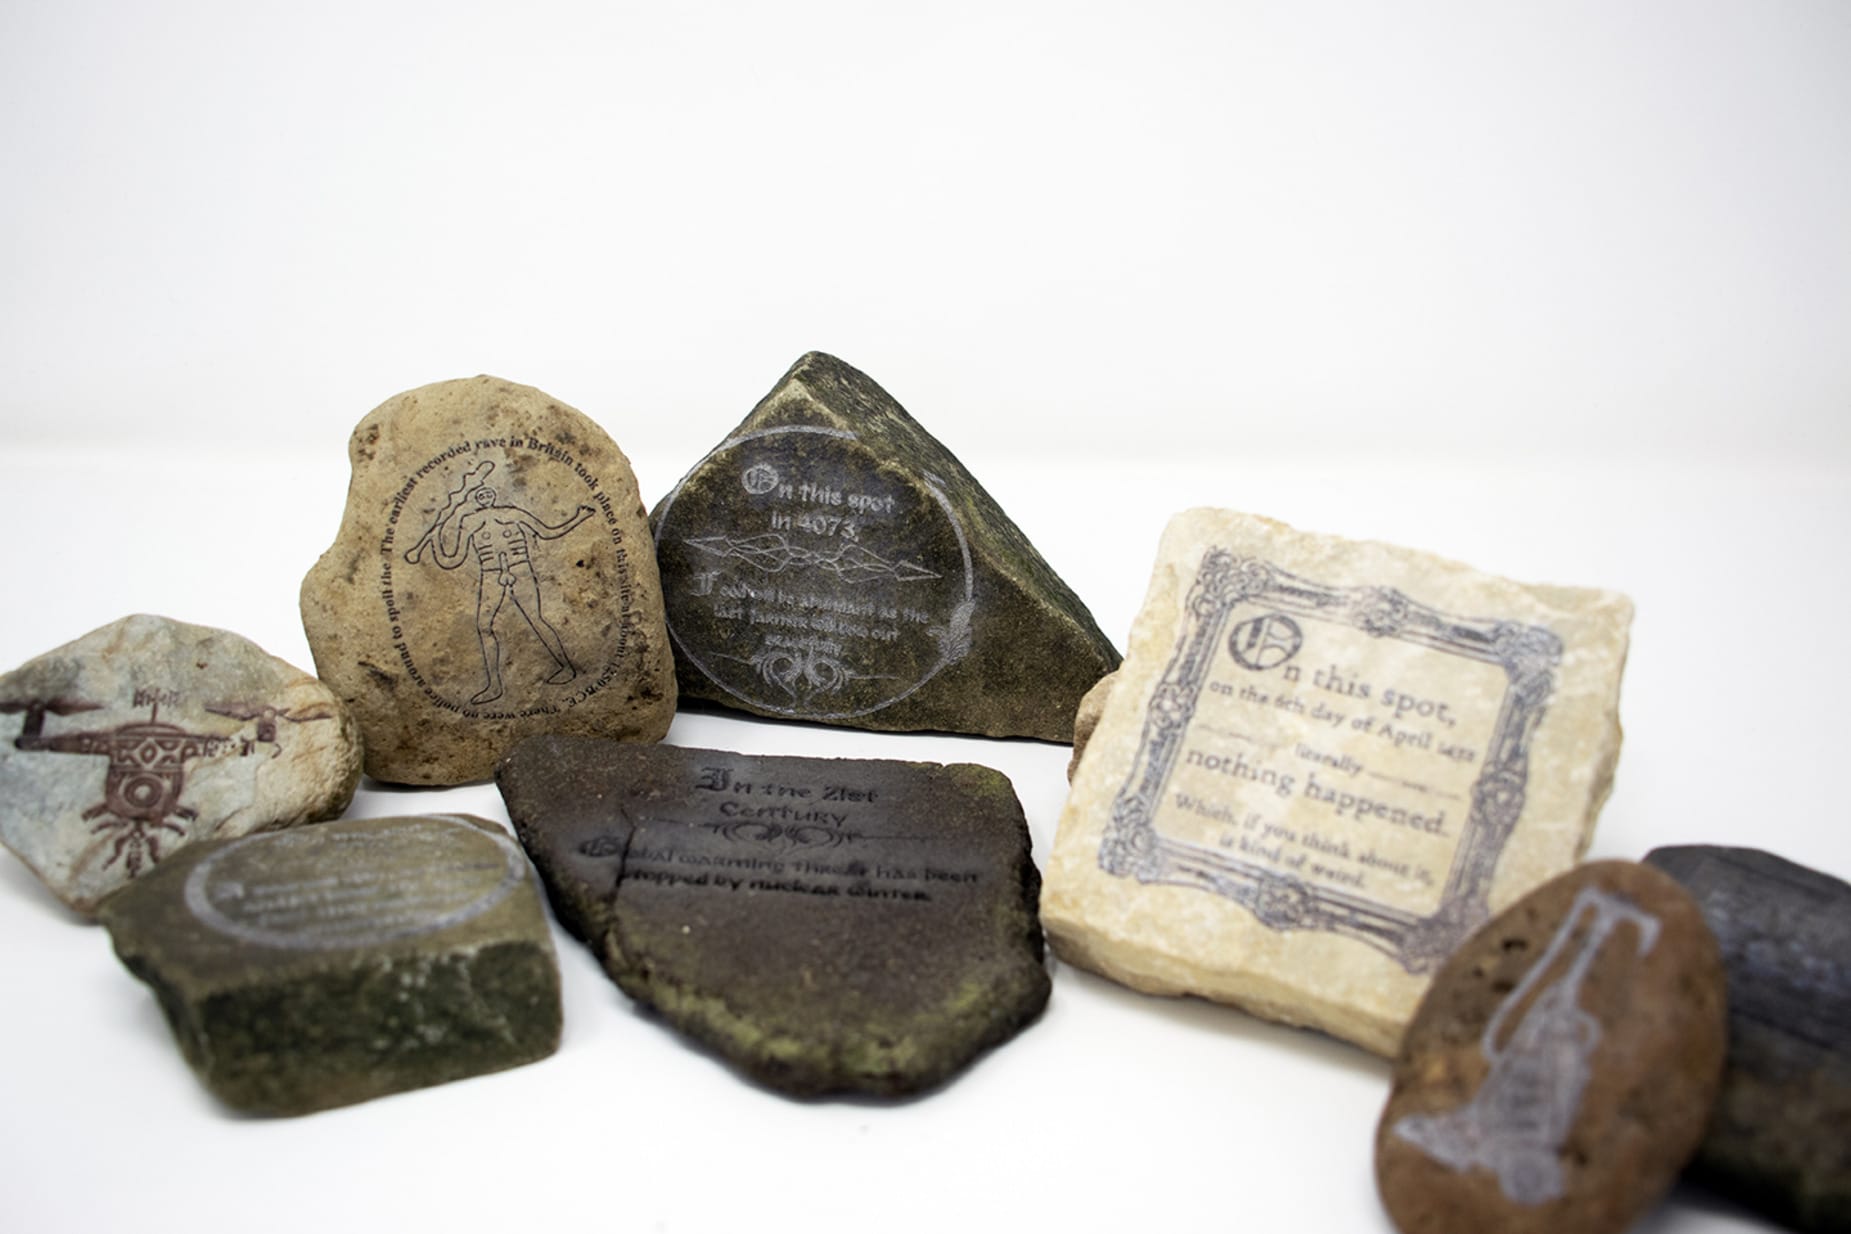 A group of stone with absurd phrases and images laser engraved on them.